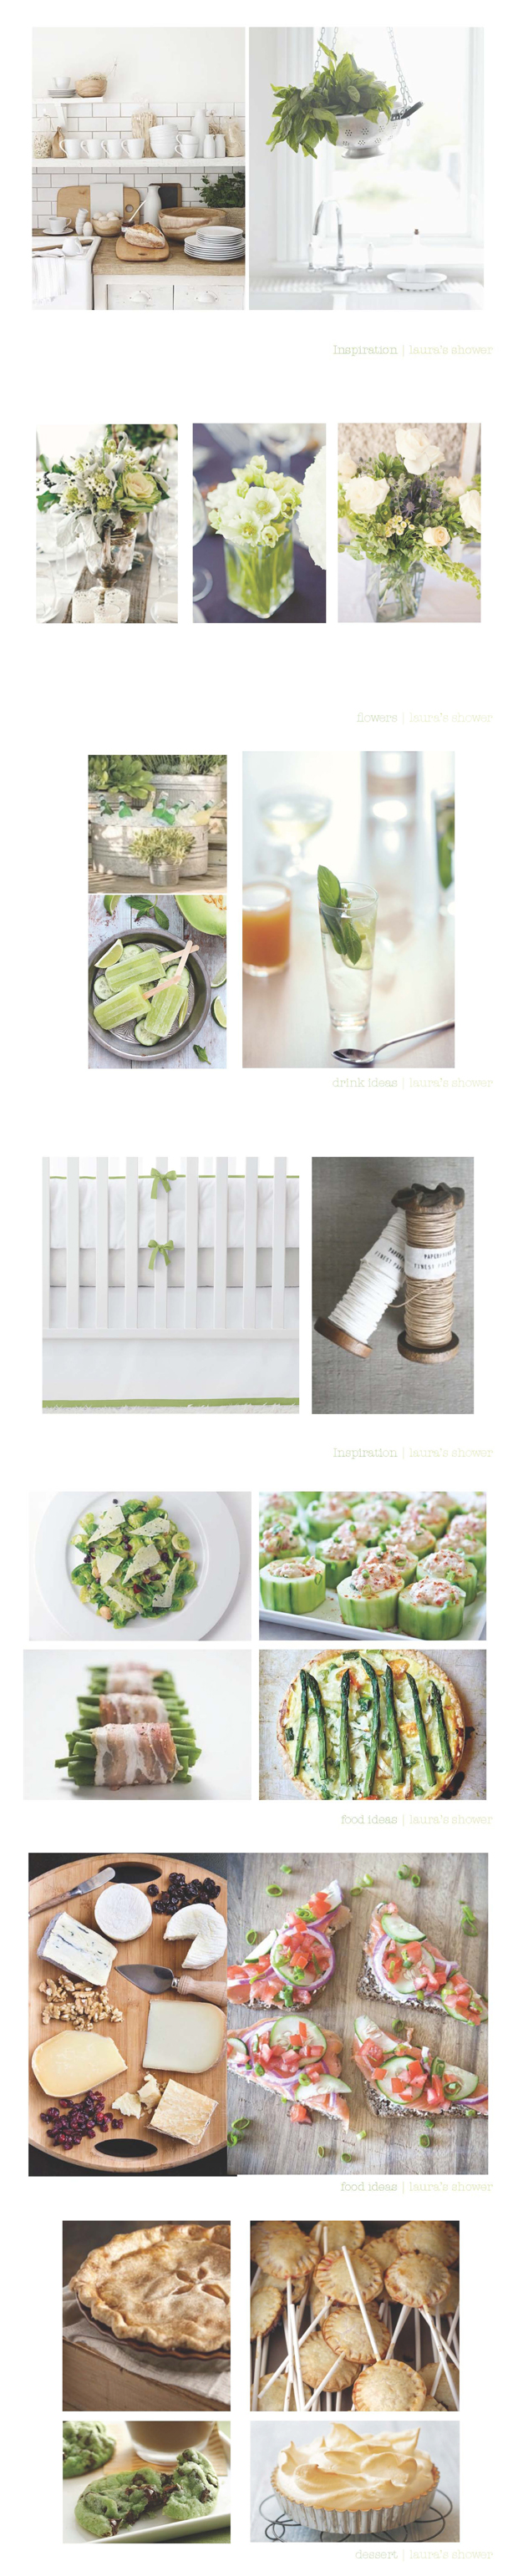 sprout inspiration board2c